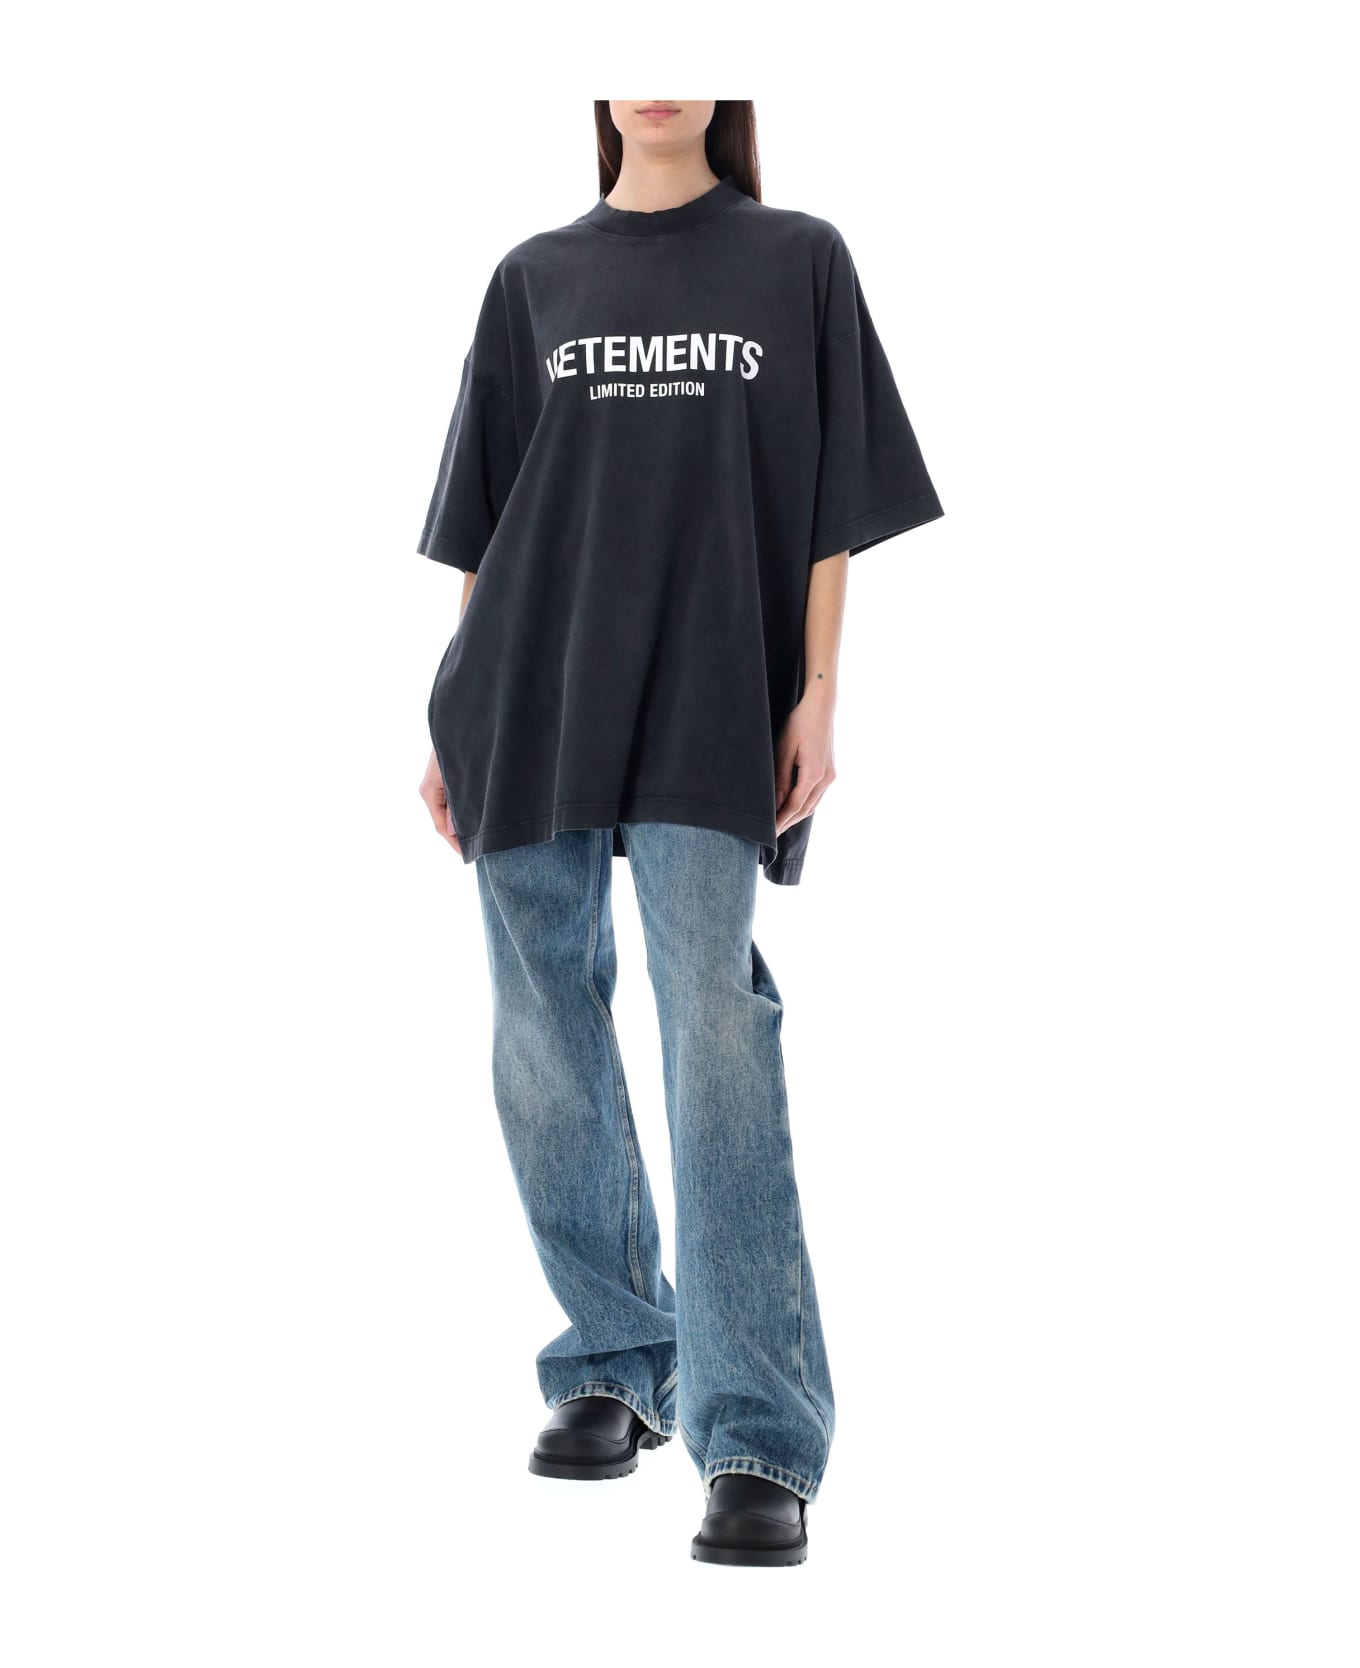 VETEMENTS Logo Limited Edition T-shirt - WASHED BLACK